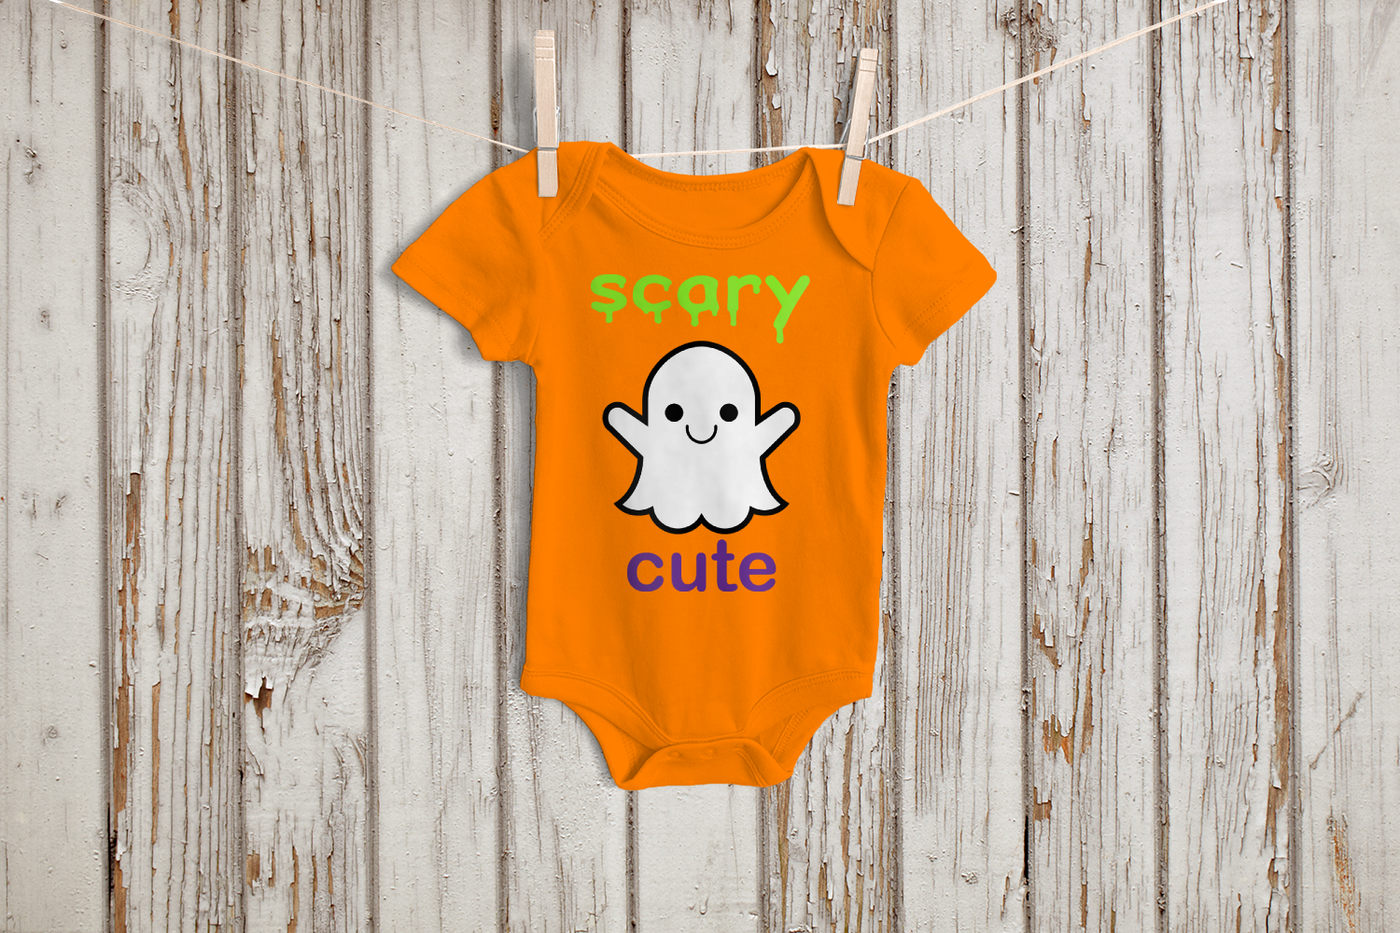 Cute ghost design with the words "Scary cute"